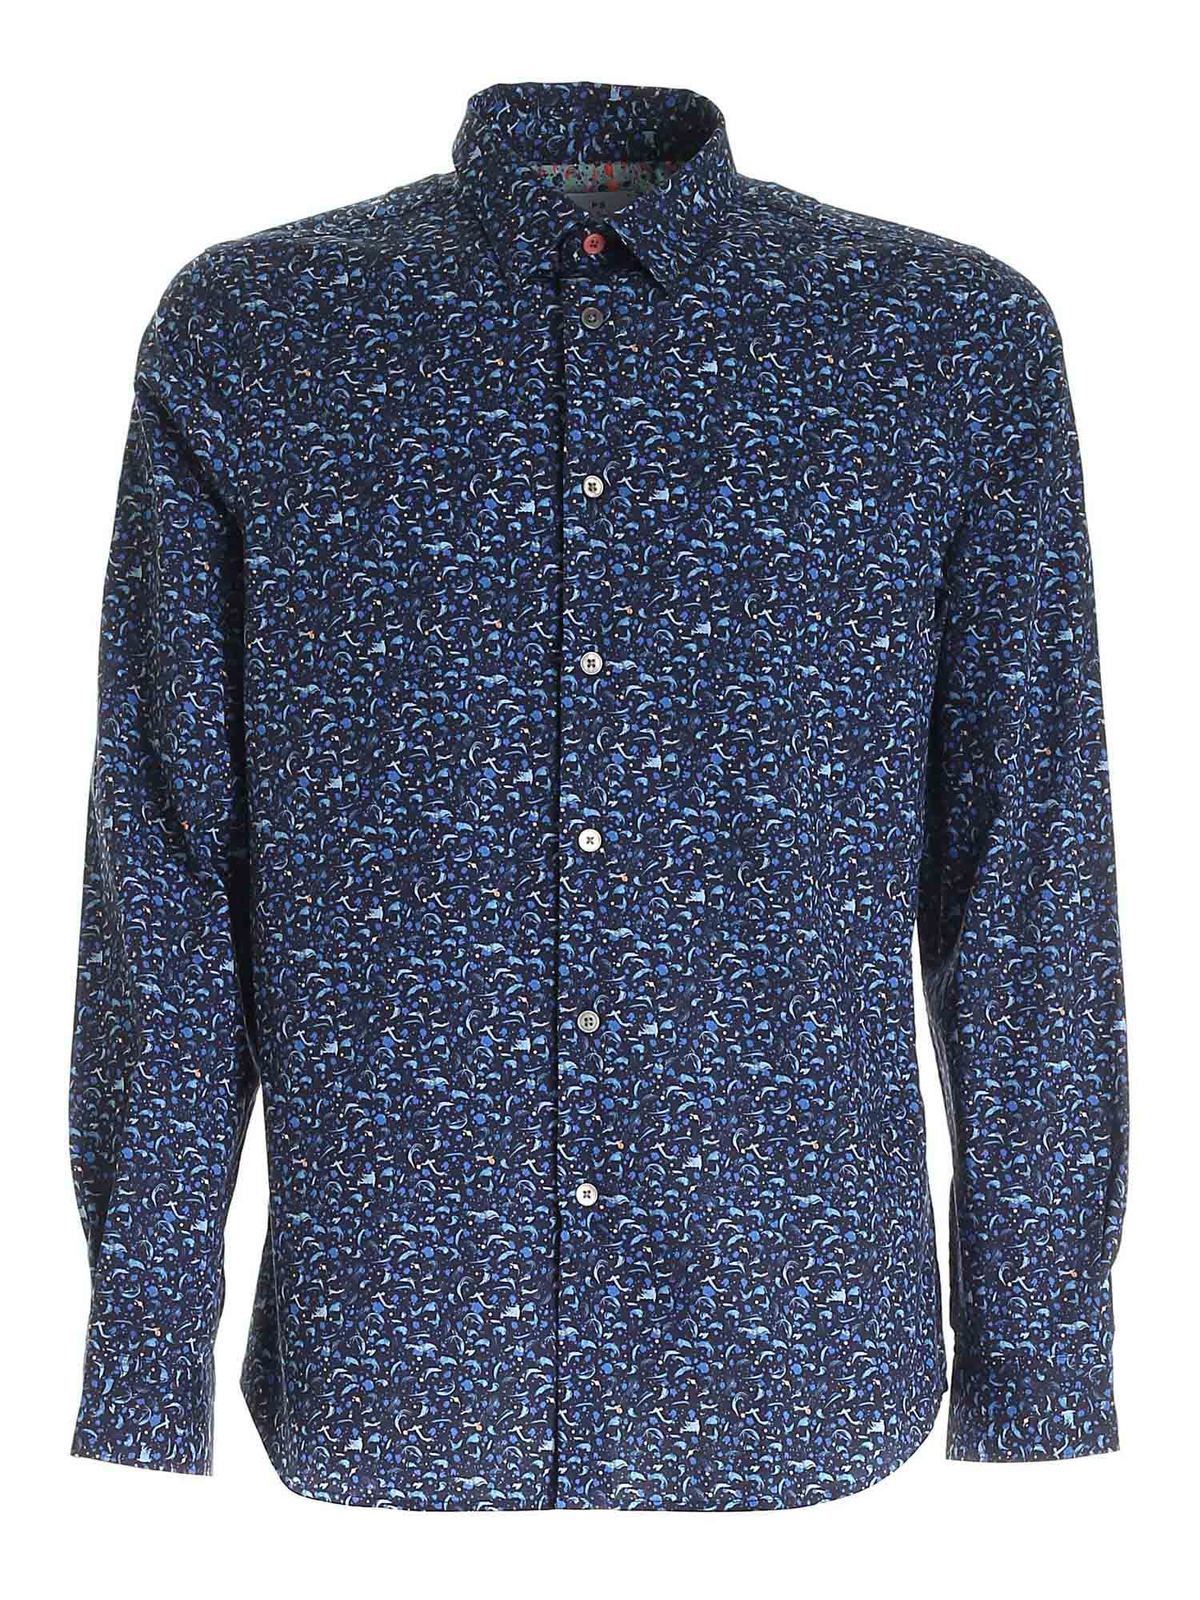 PS BY PAUL SMITH PRINTED SHIRT IN BLUE AND LIGHT BLUE